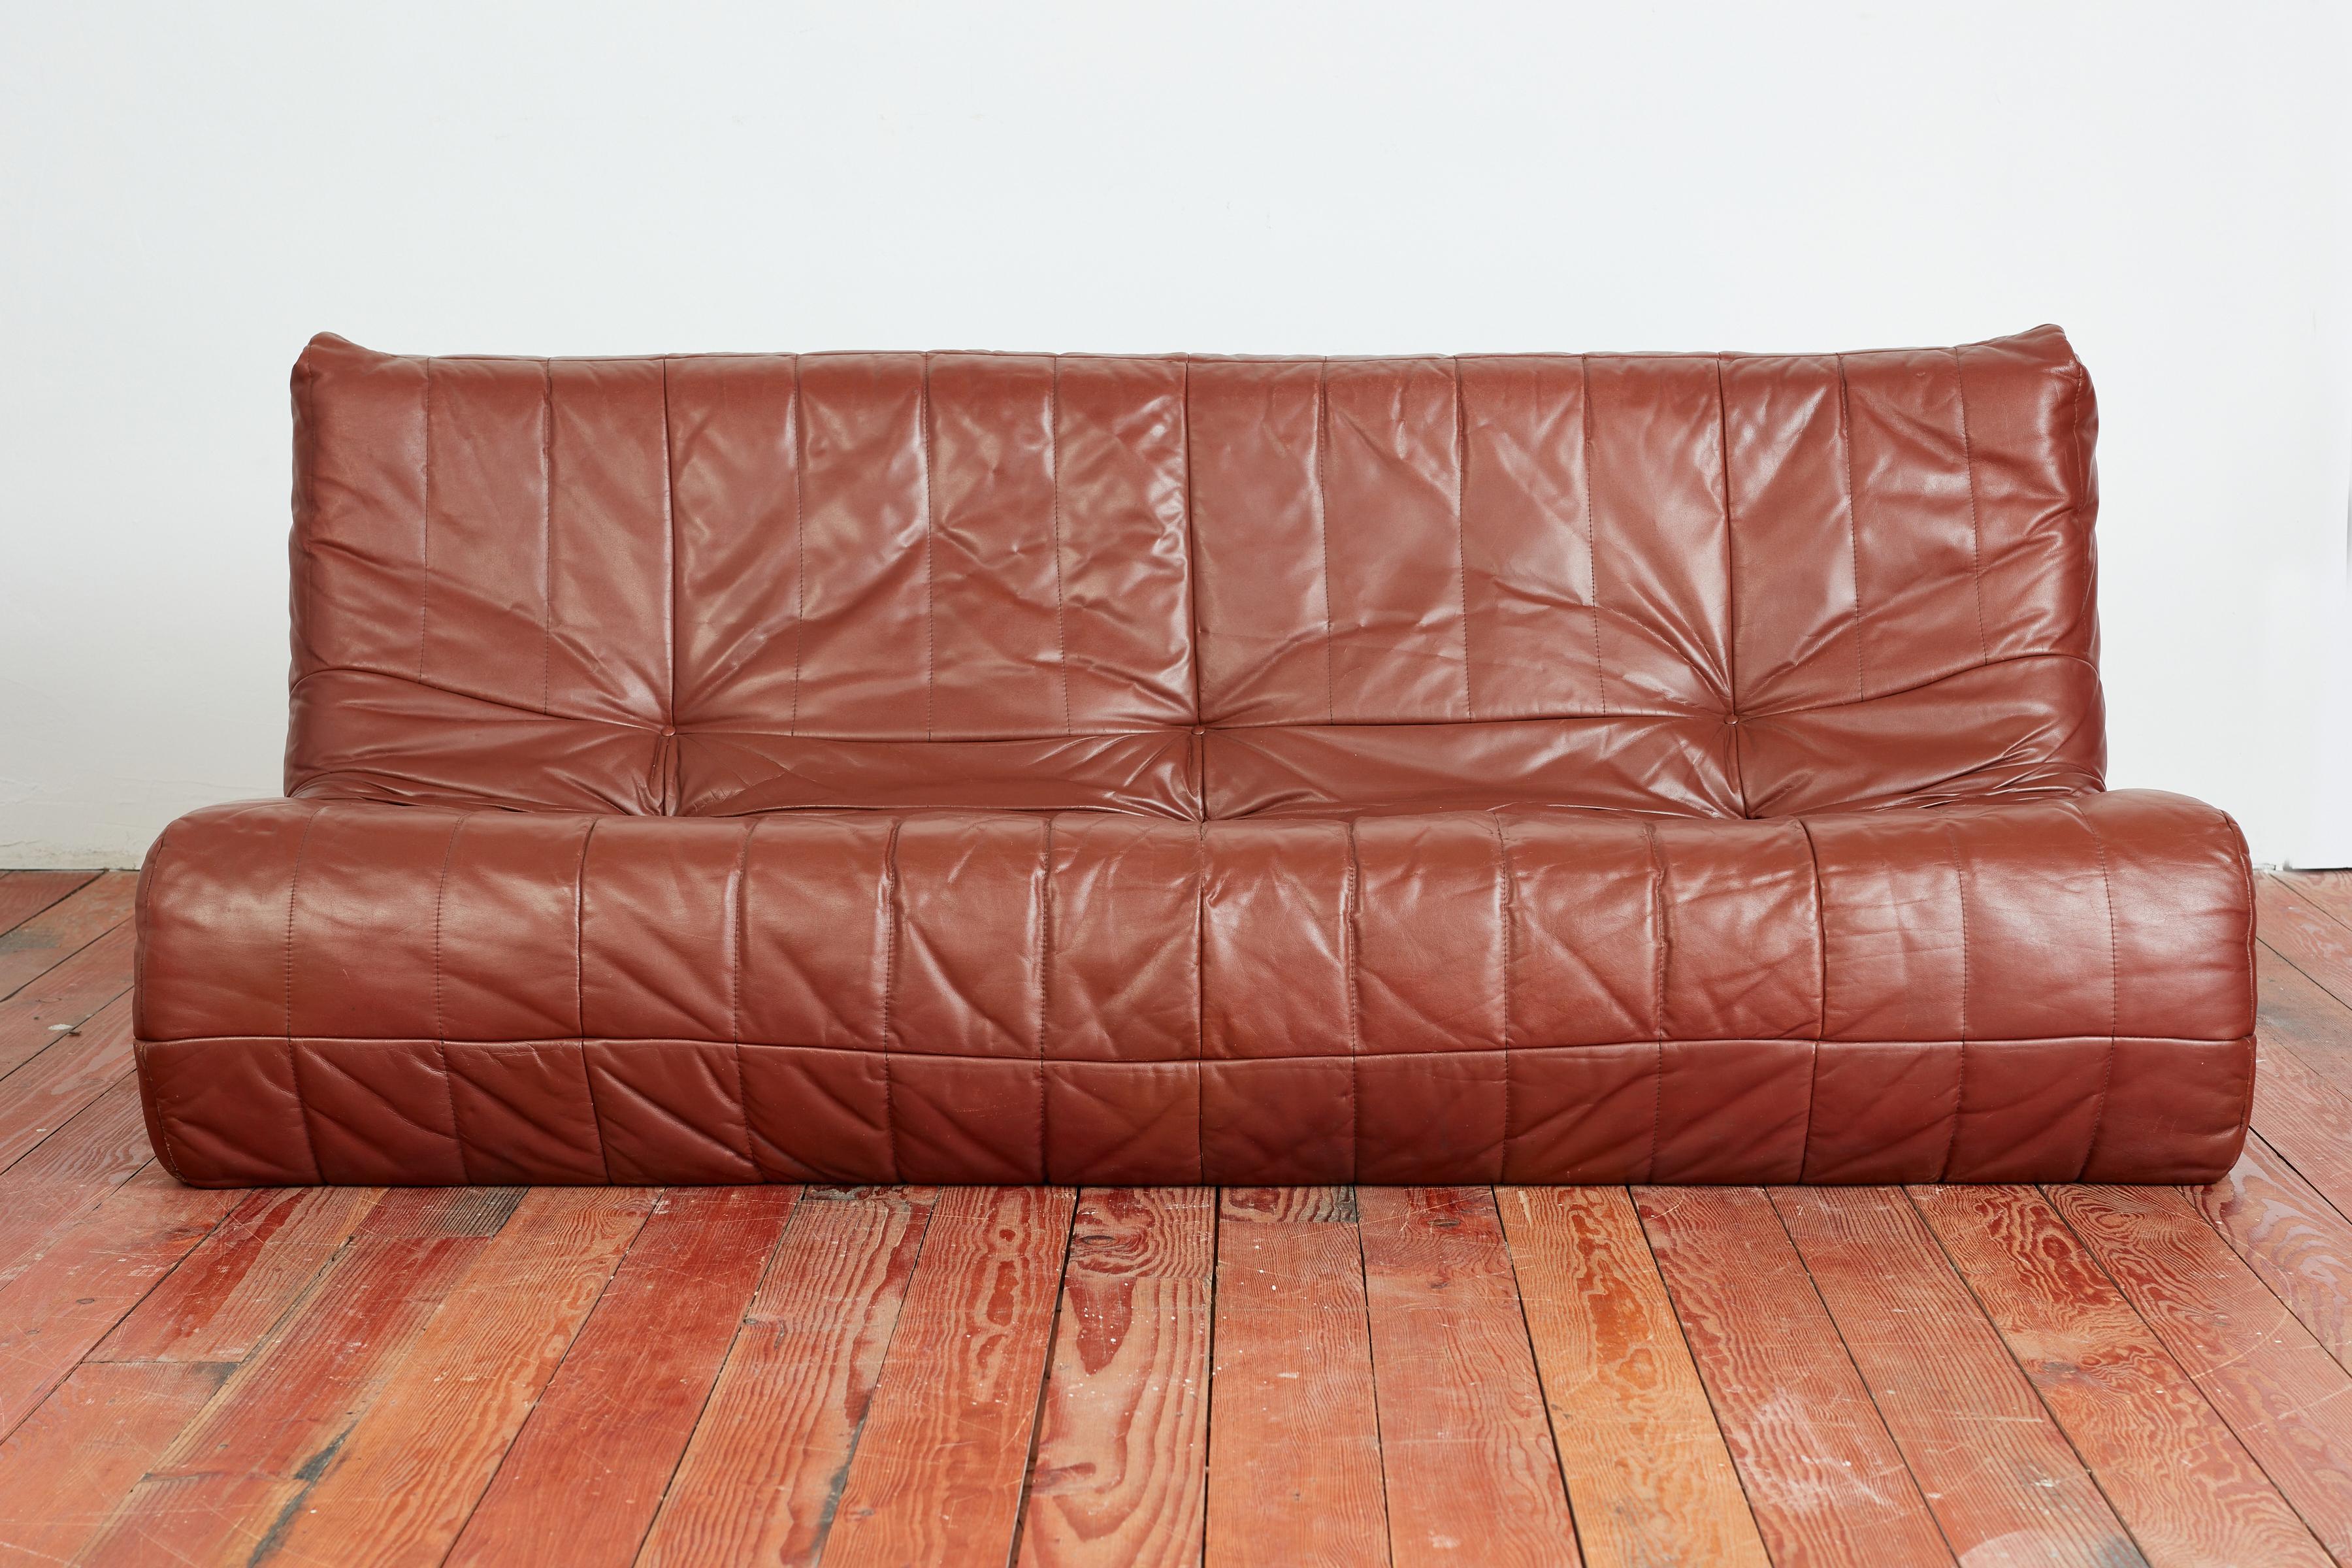 1970's Italian leather settee in the style of a TOGO- with foam core and wrapped with cognac colored leather with vertical stitching.  Italy, 1970's  Matching sofa available

Matching Settee Available 